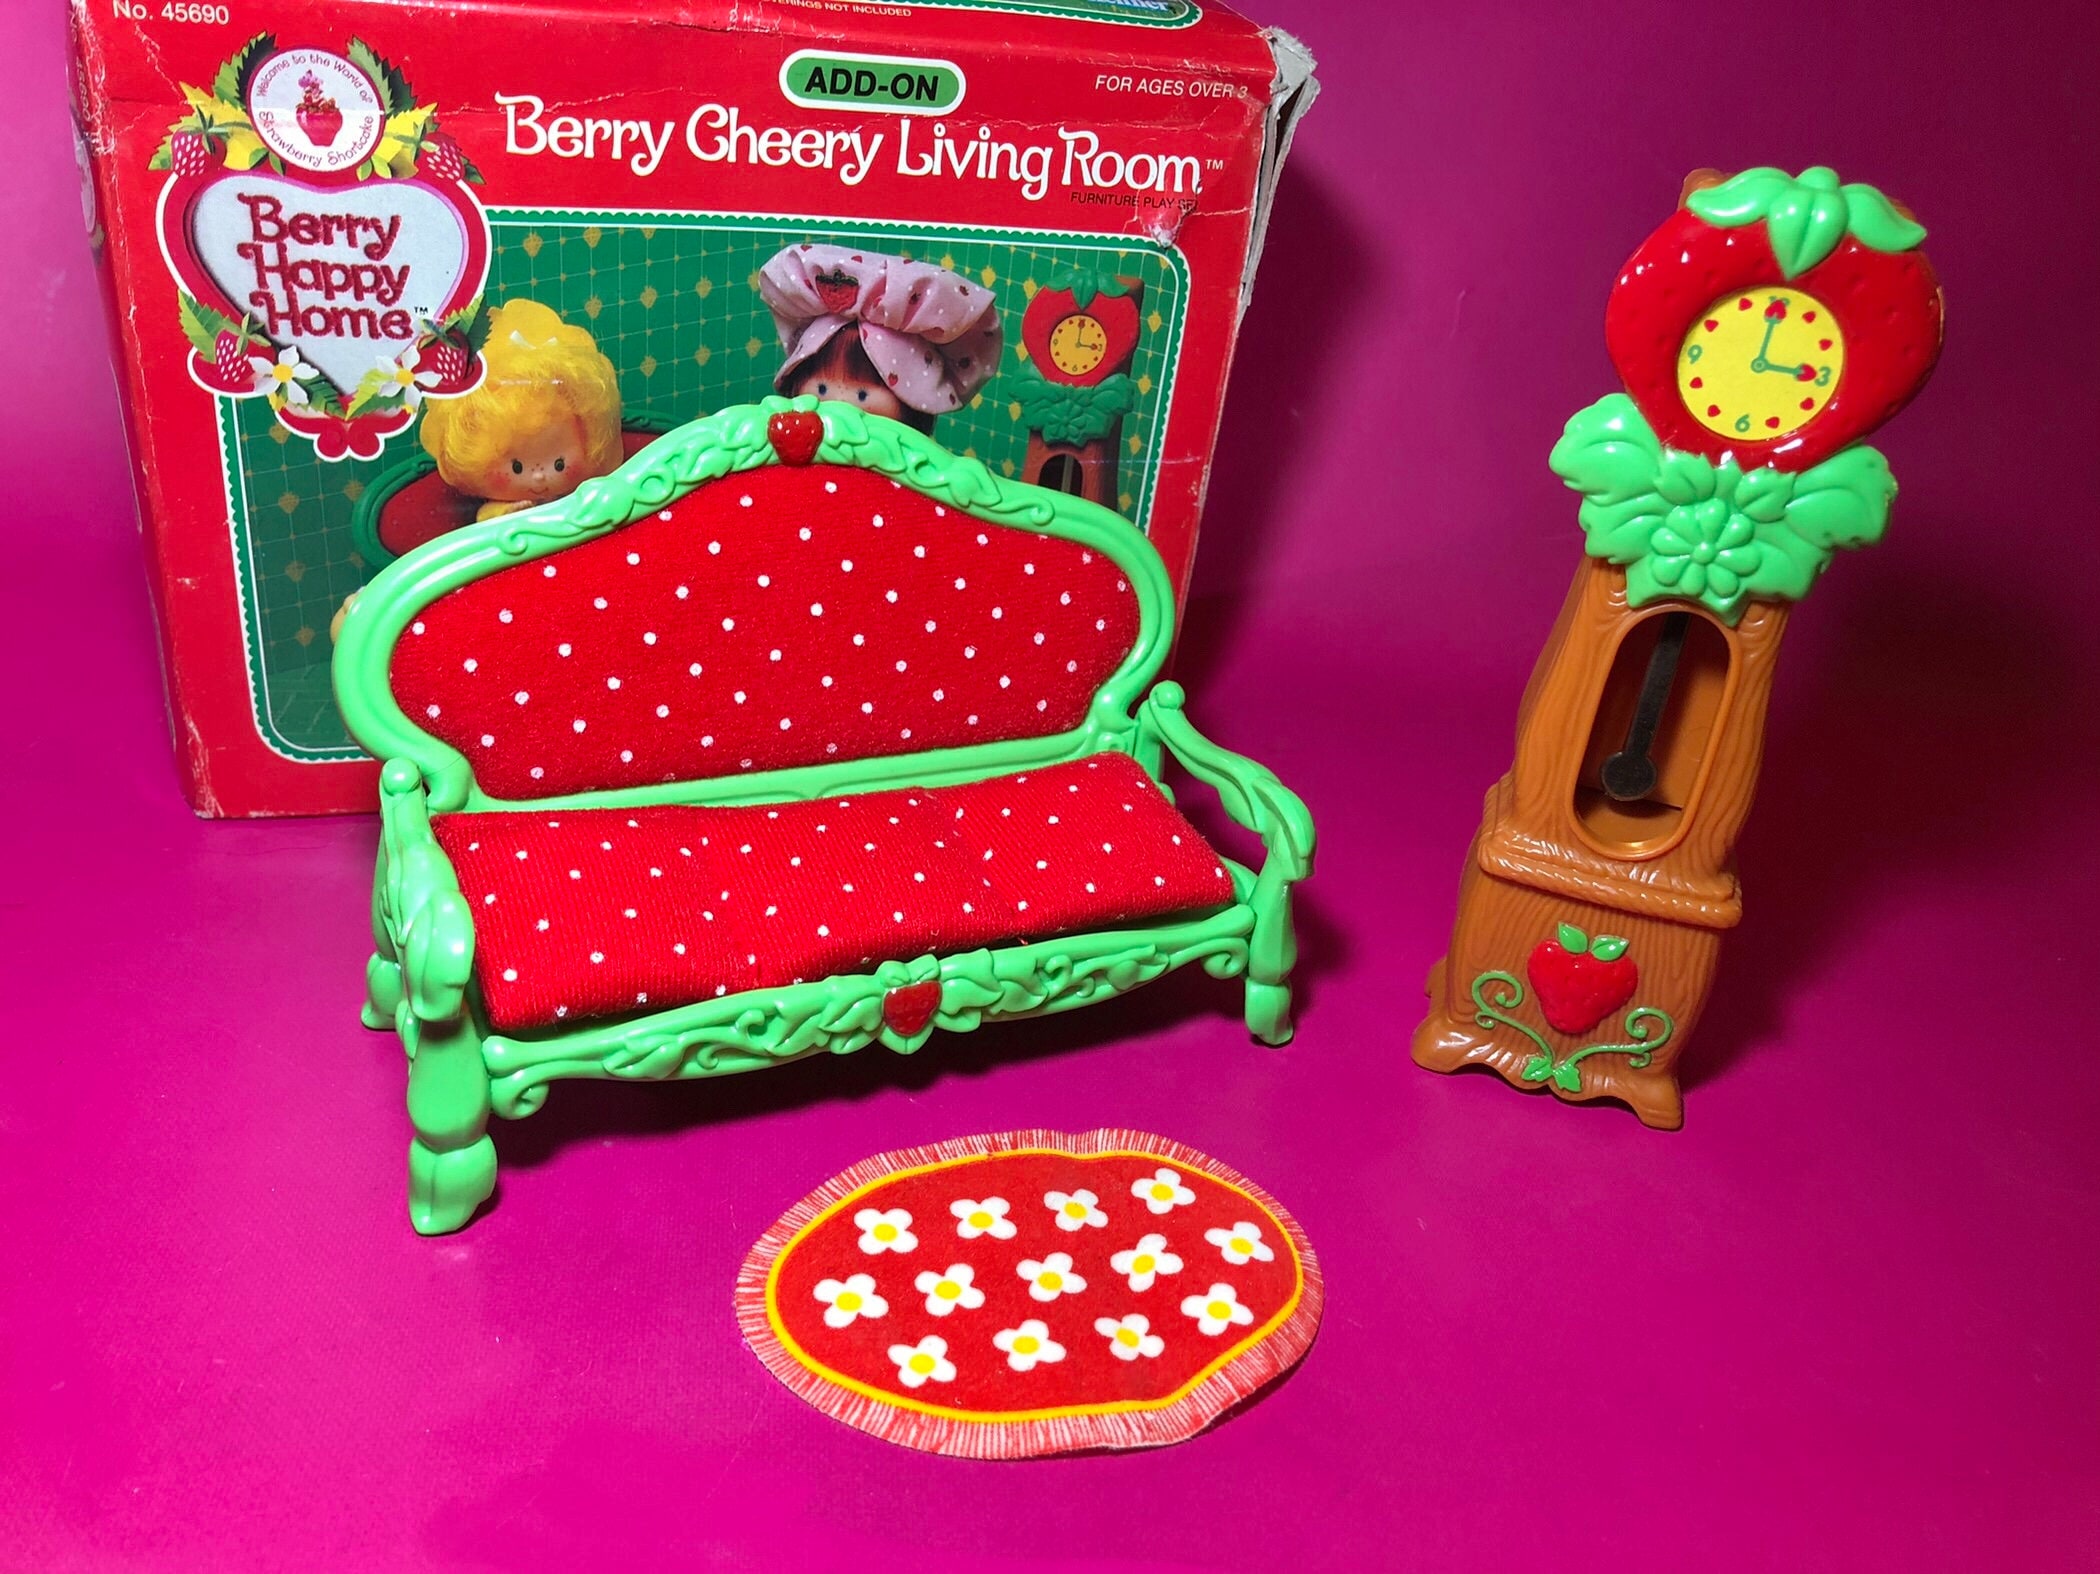 Berry Happy Home LIVING ROOM Furniture With Box Strawberry | Etsy